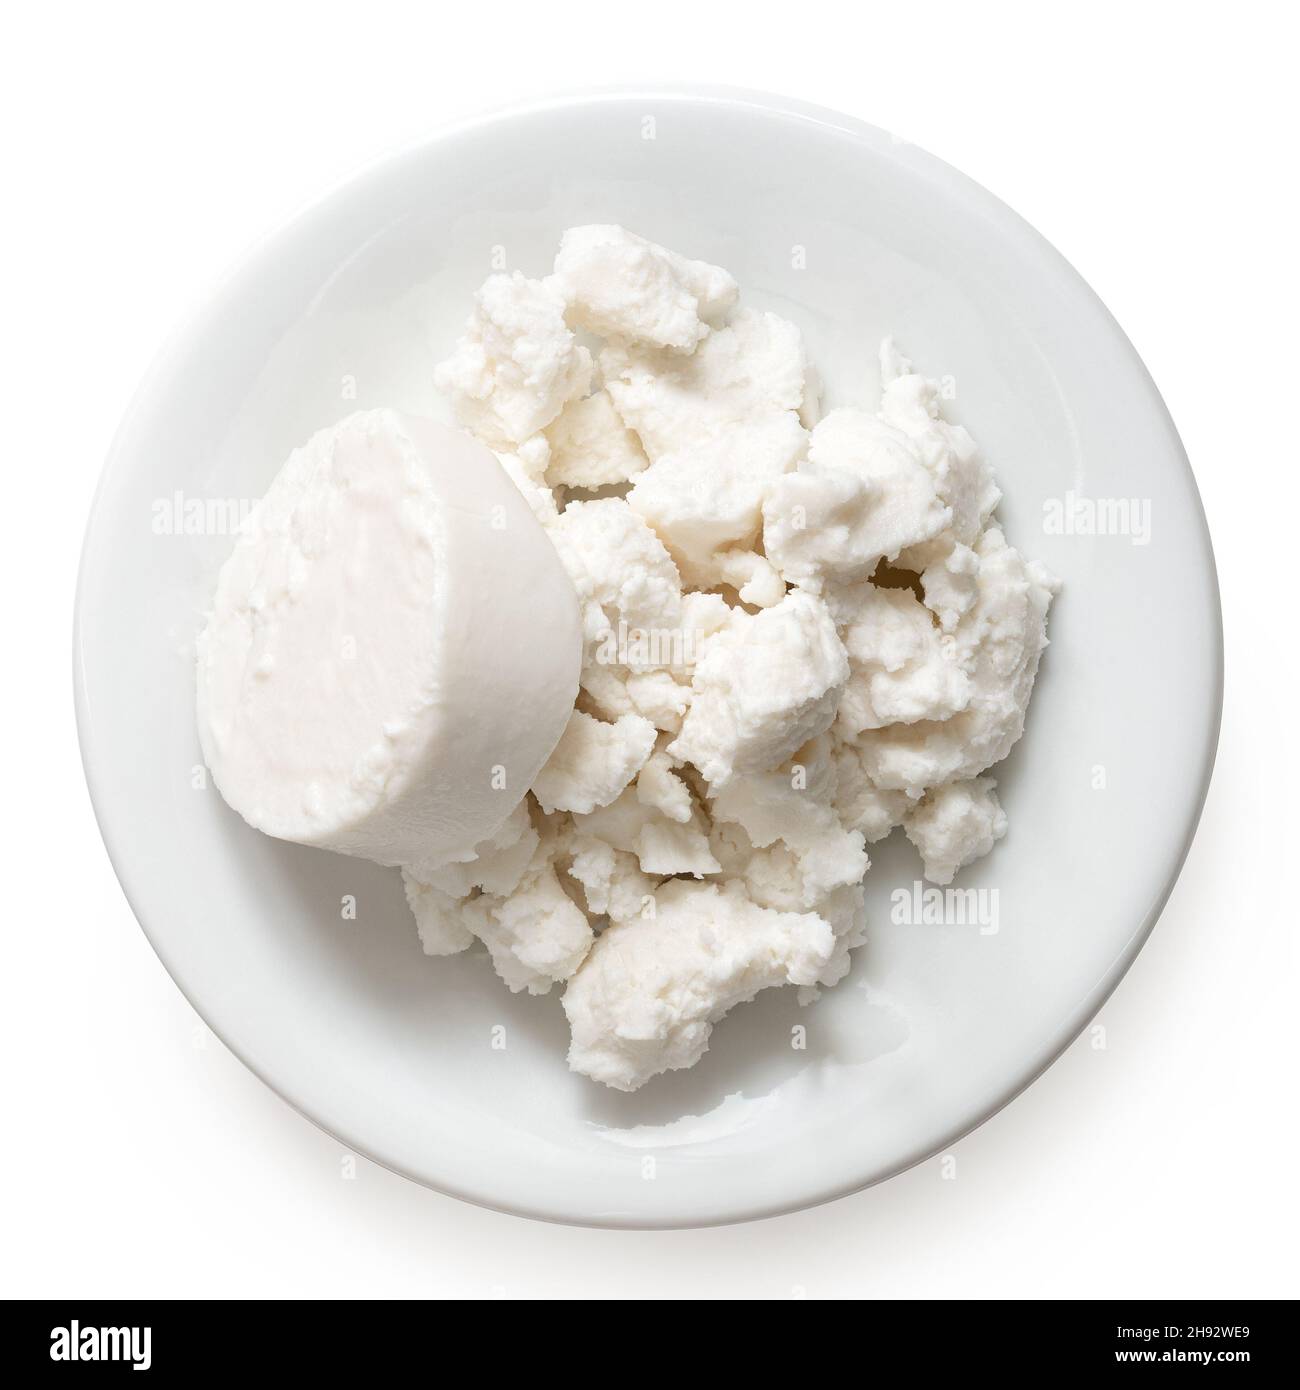 Round of goat cheese and crumbled goat cheese on white ceramic plate isolated on white. Top view. Stock Photo